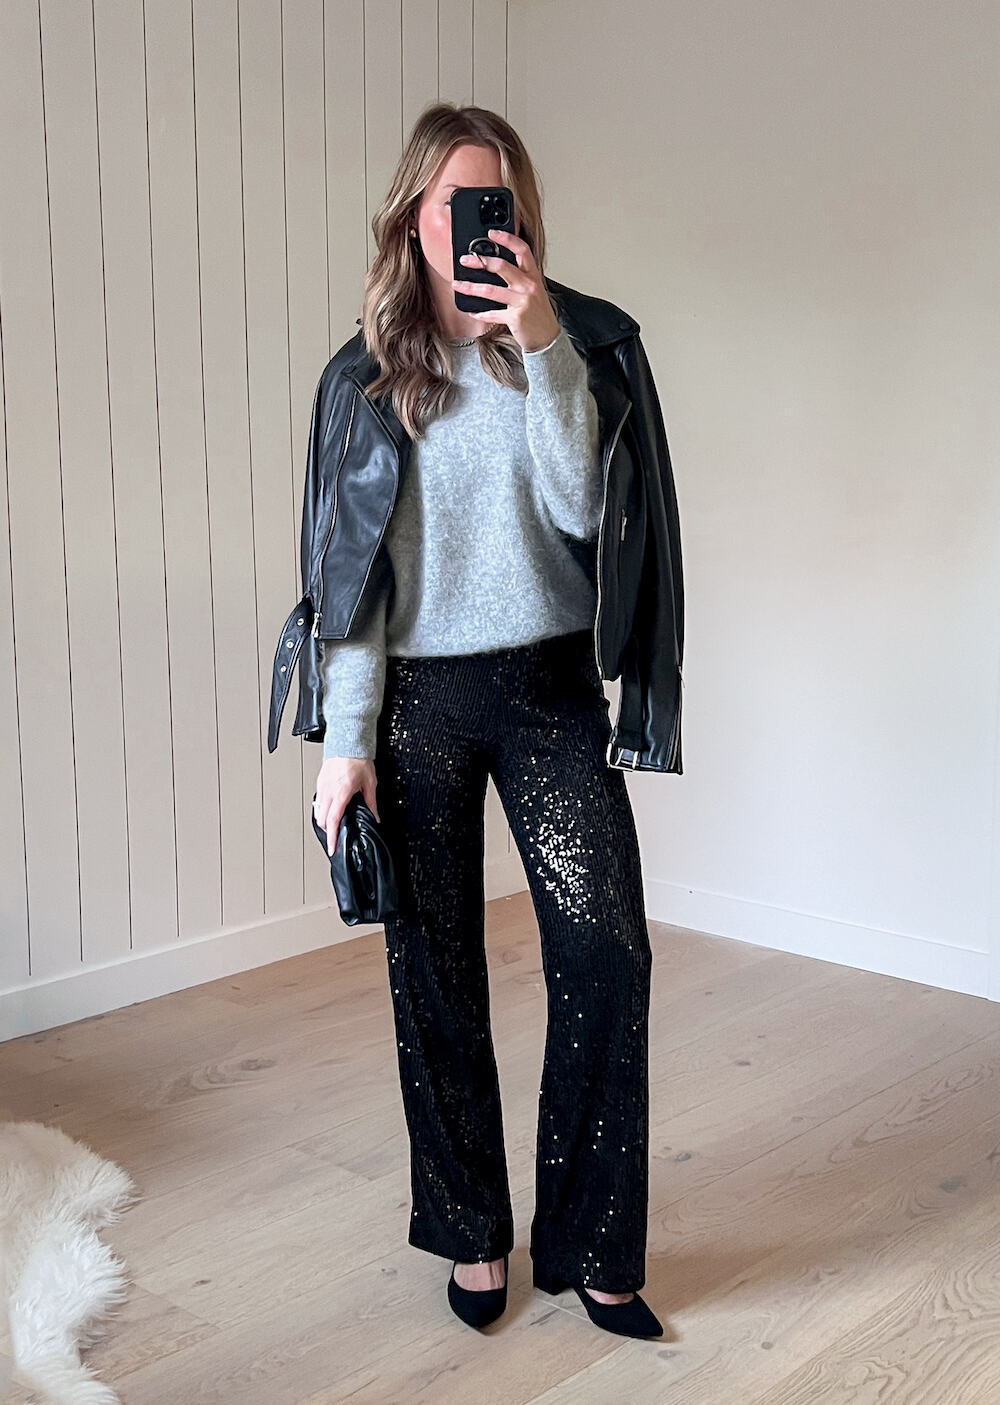 A woman wearing sparkly black wide leg pants with a light grey crewneck sweater, a black leather jacket, and black heels